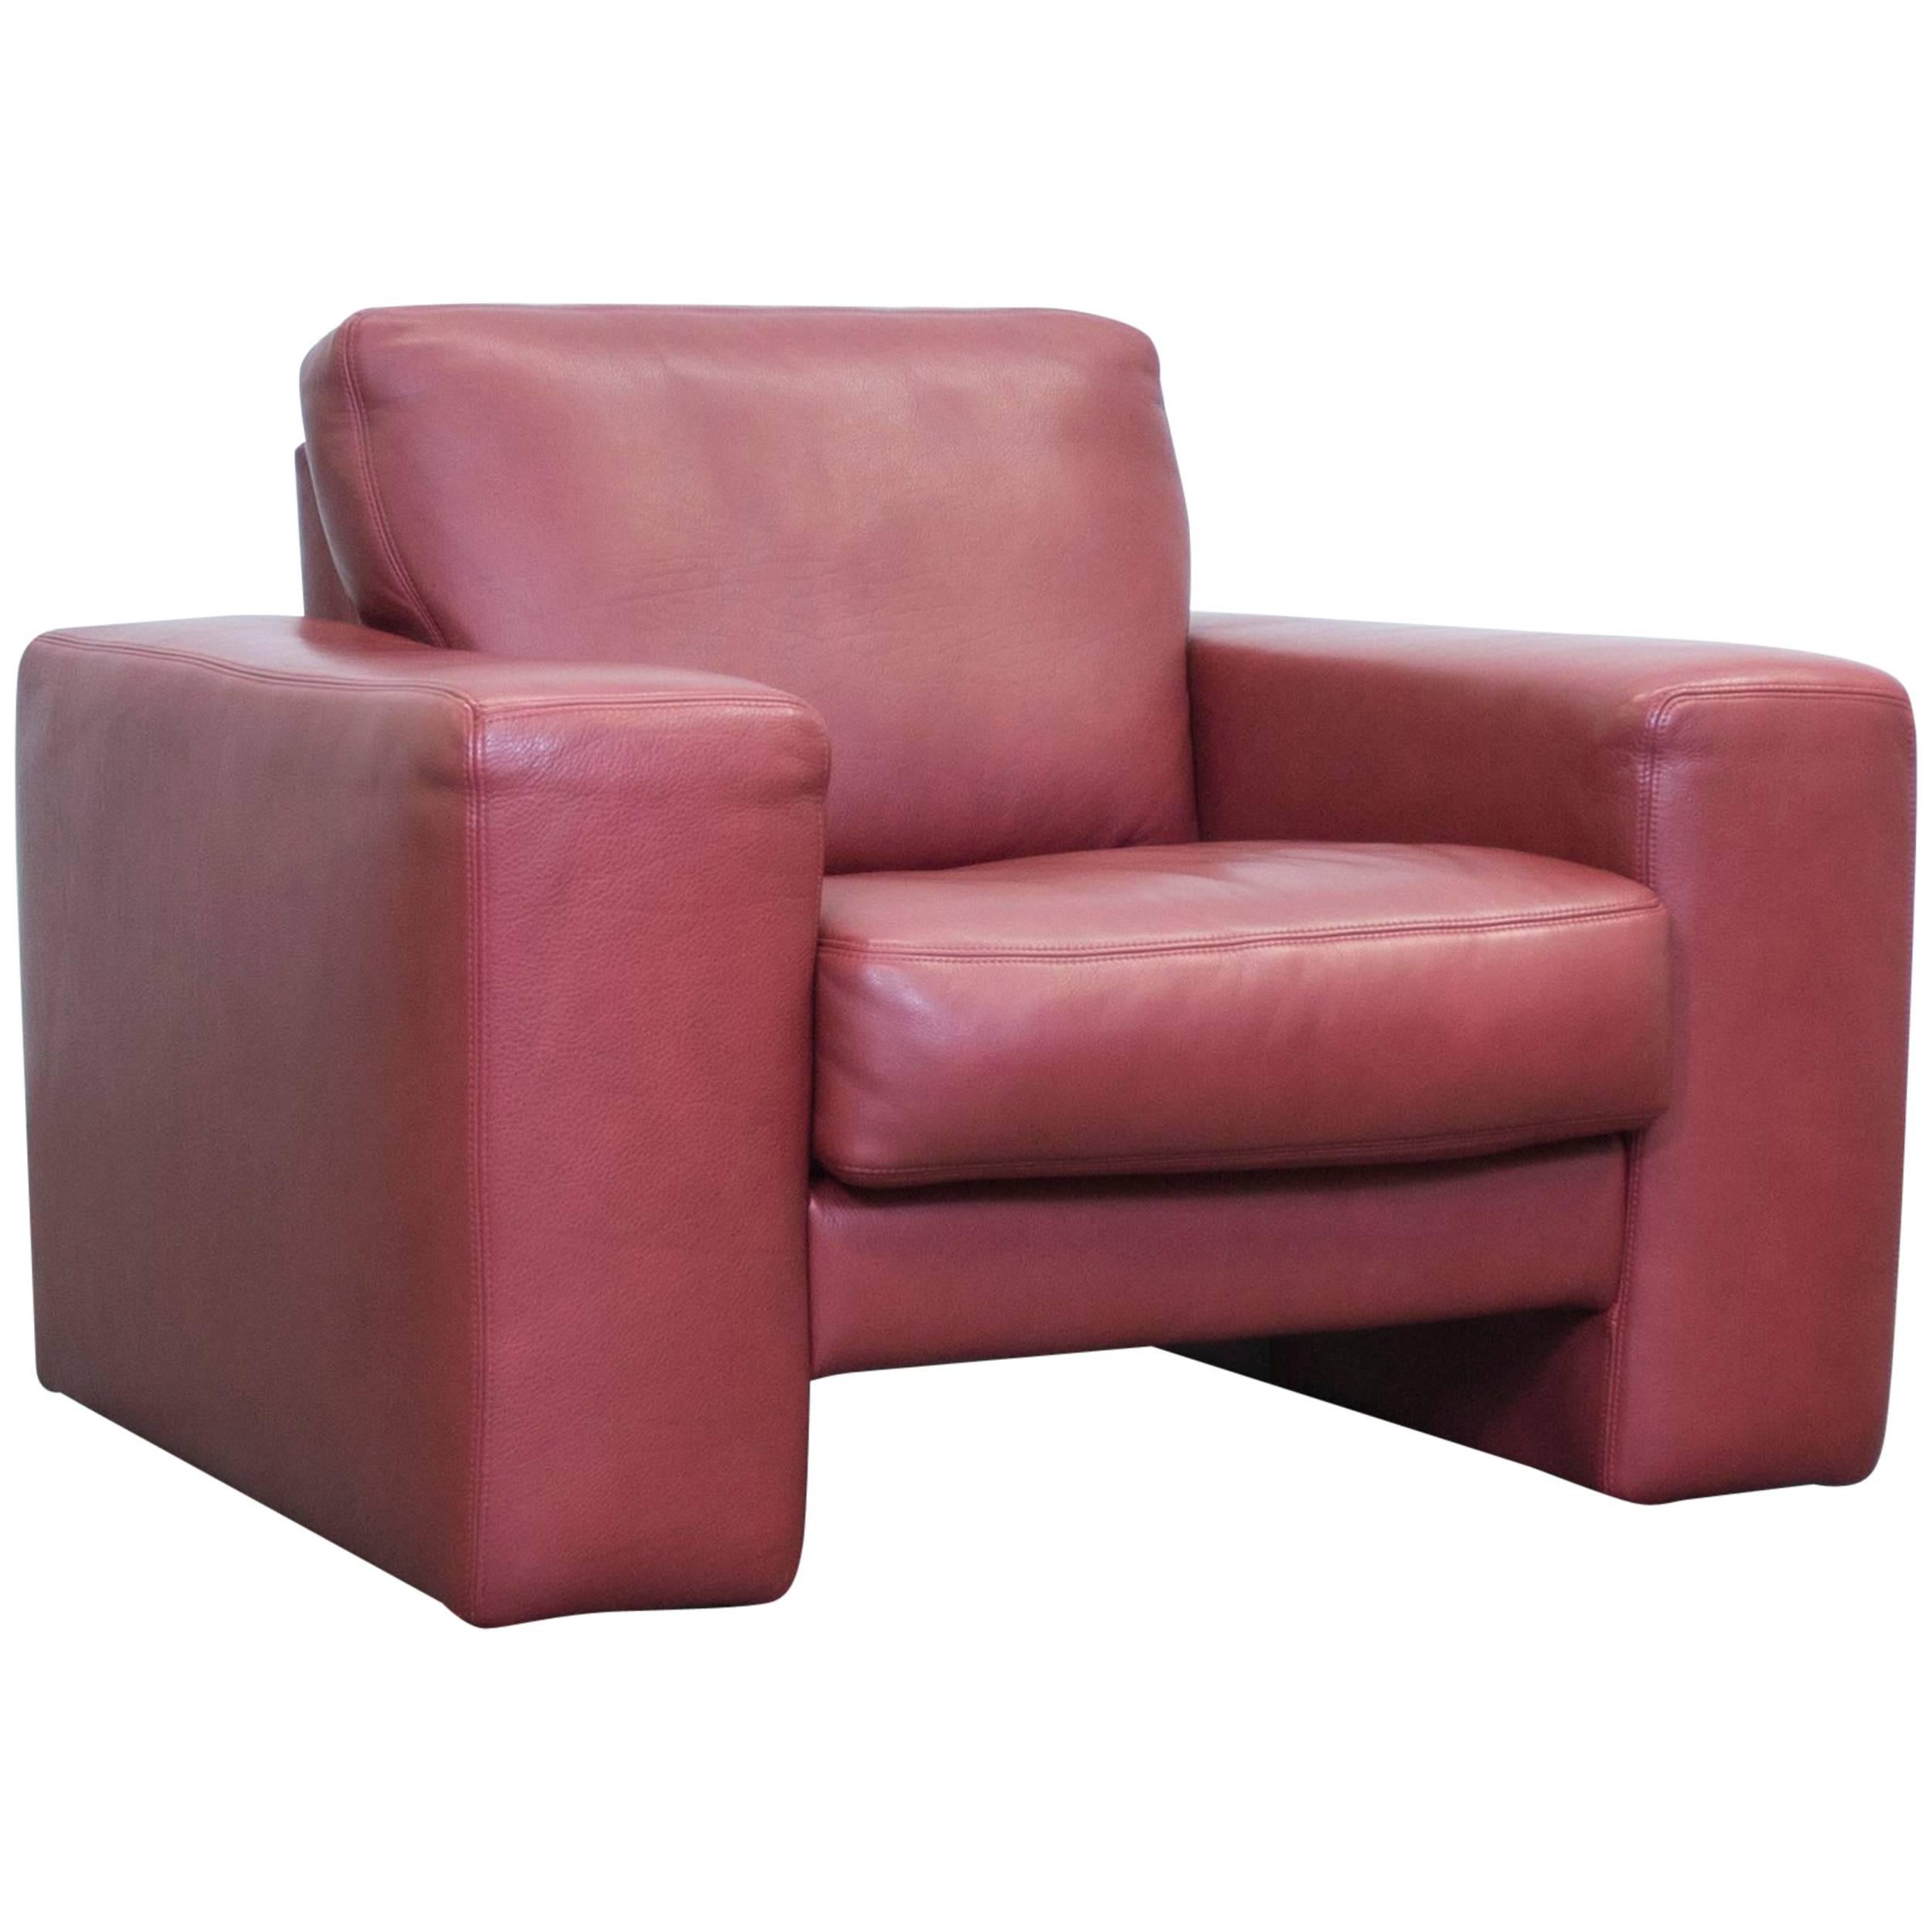 Koinor Designer Leather Armchair Red One seat Couch Modern